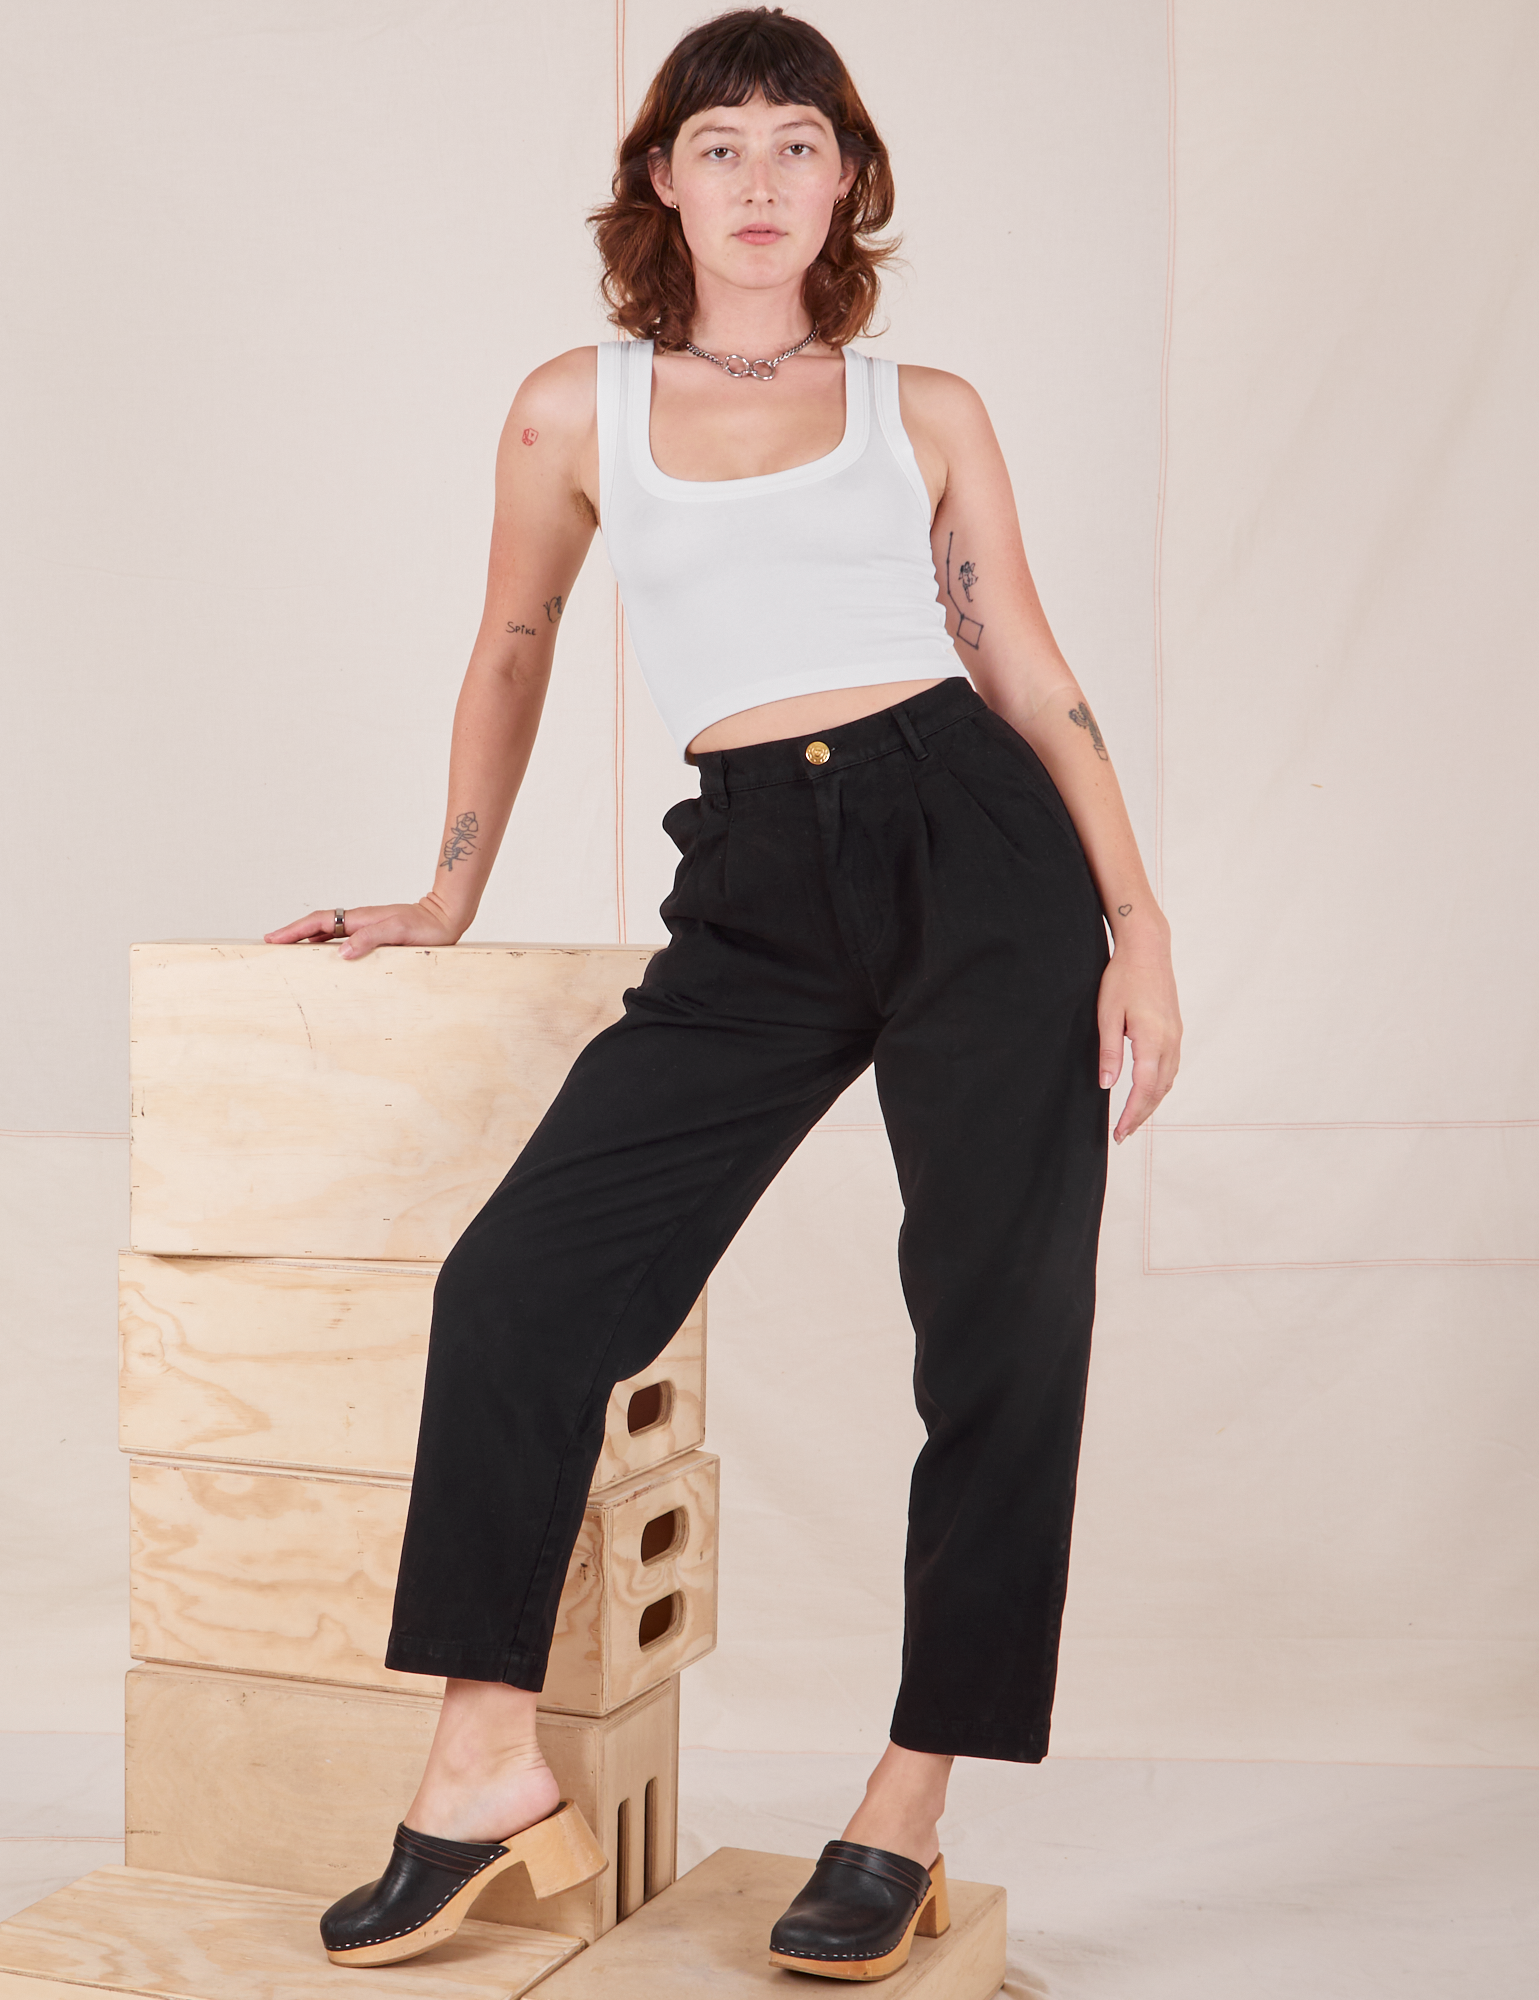 Alex is wearing Heavyweight Trousers in Basic Black and Cropped Tank Top in vintage tee off-white 